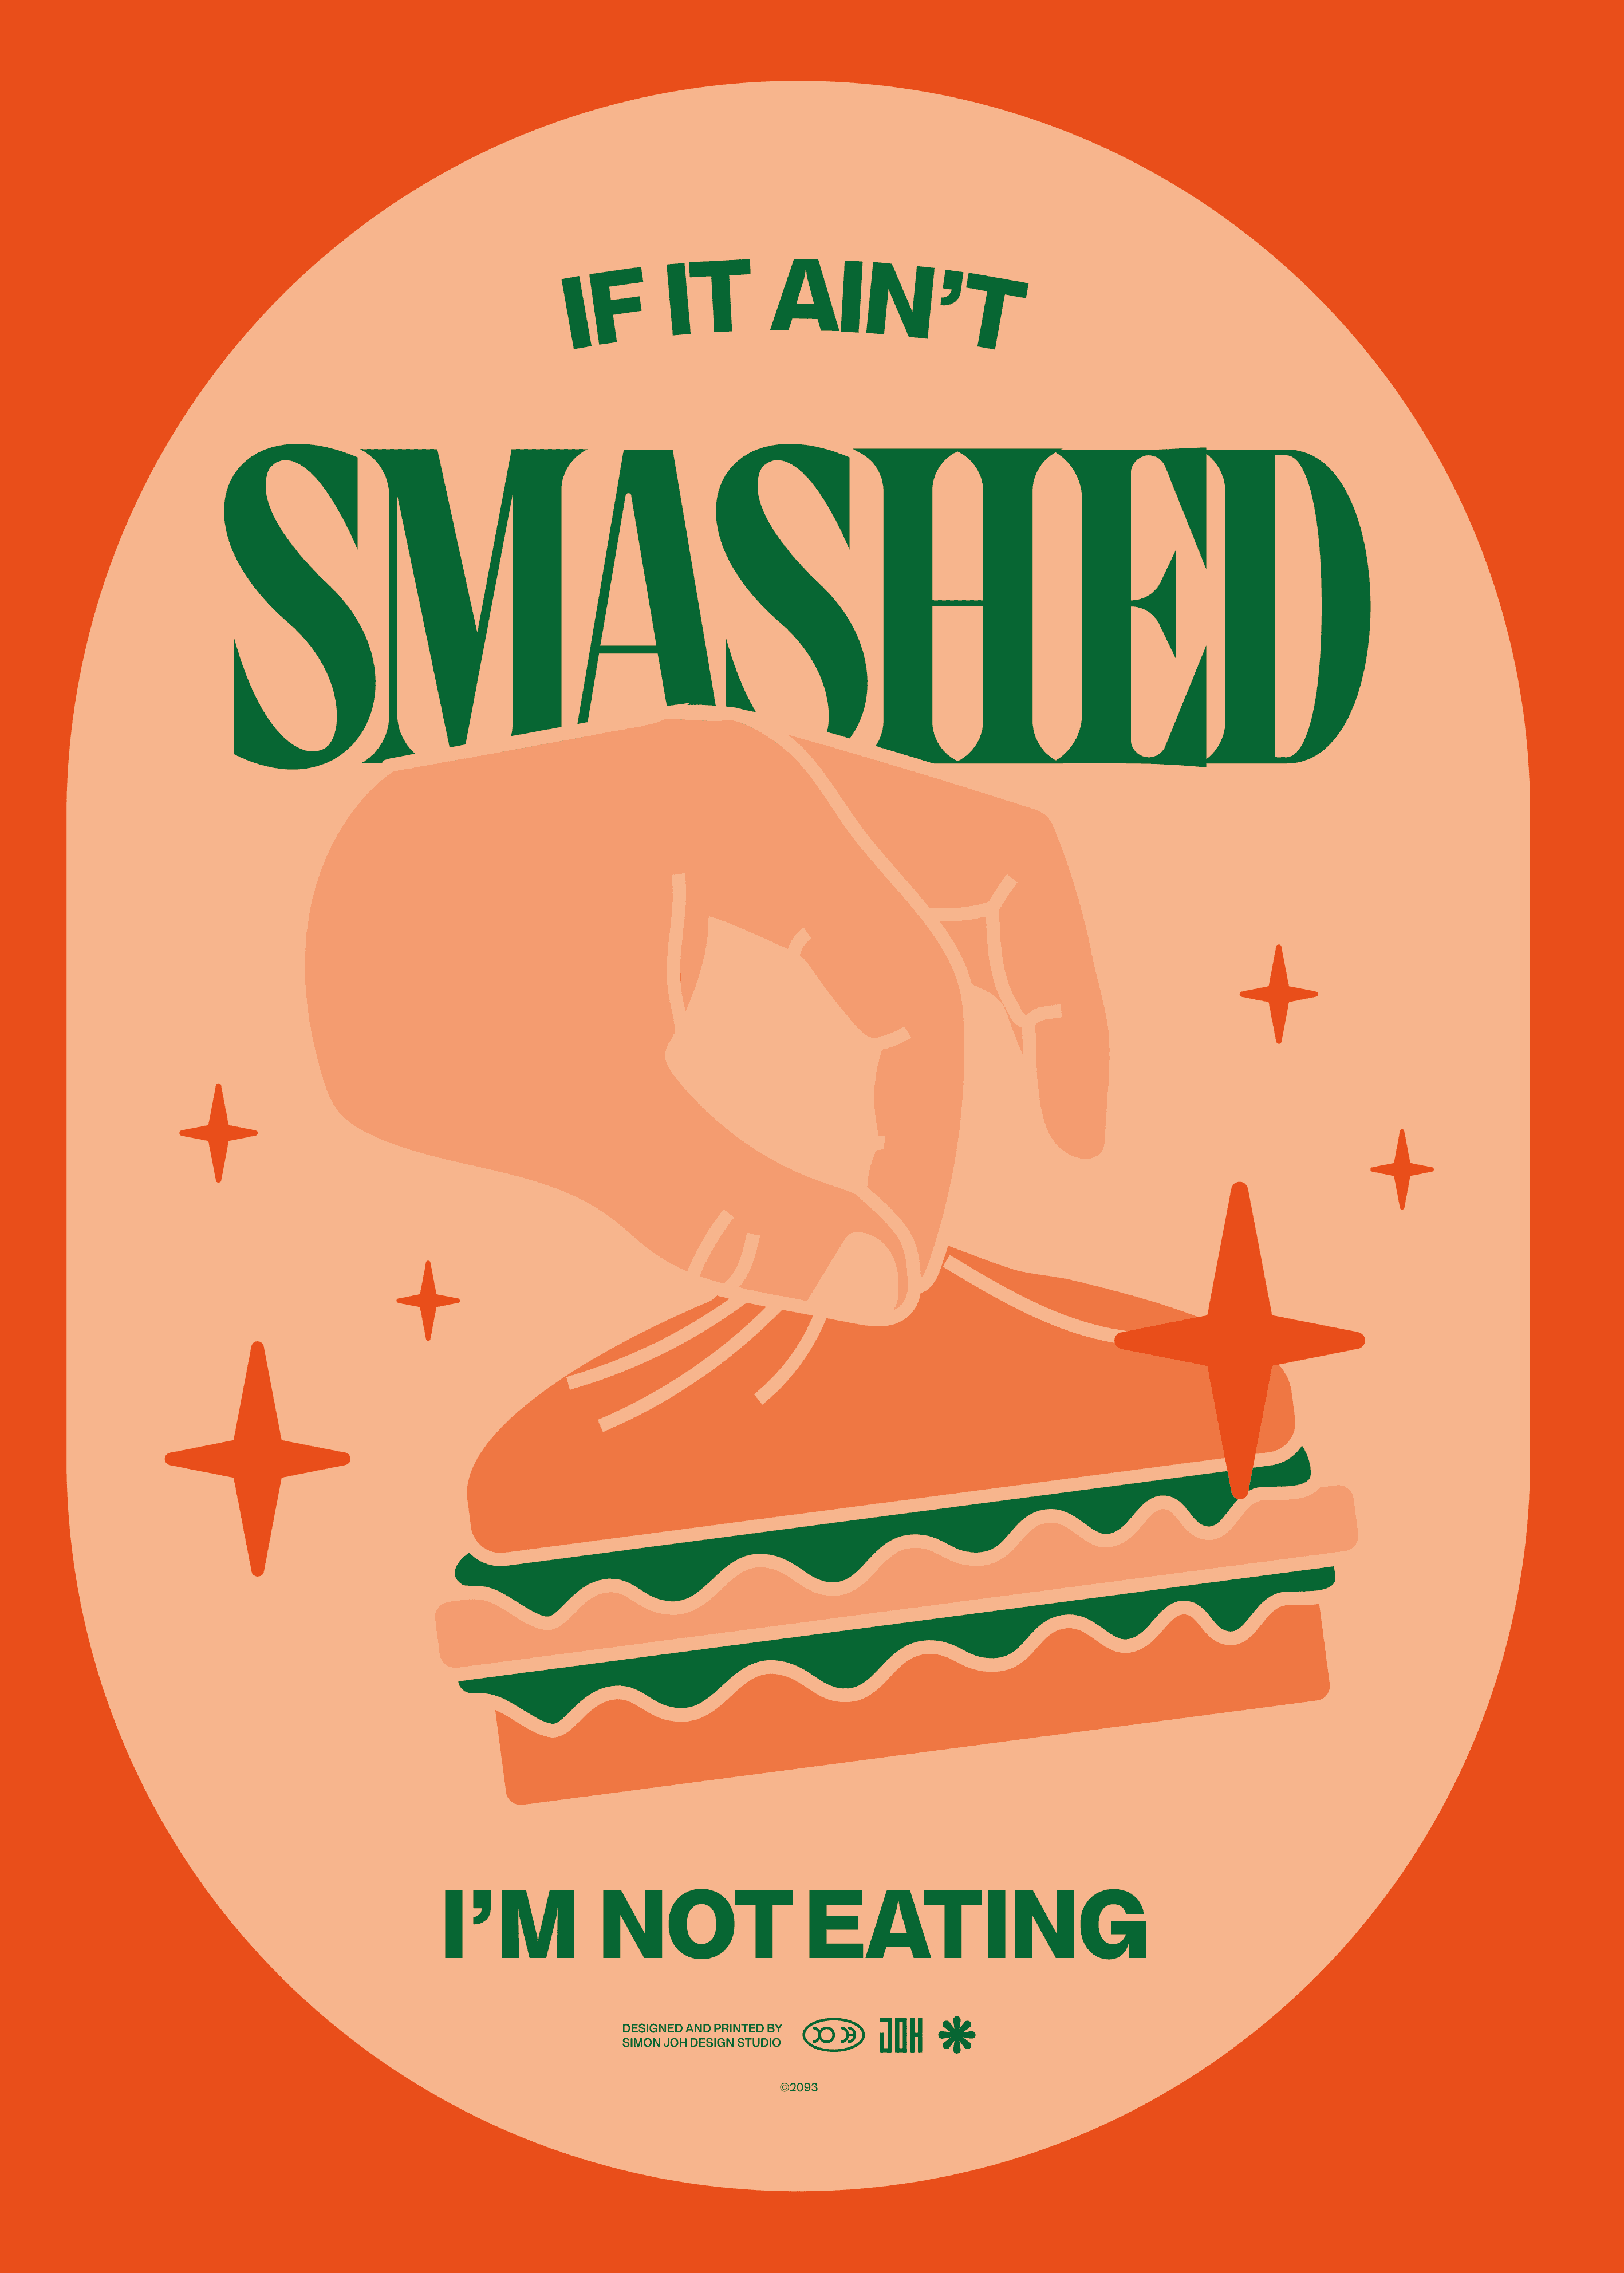 joh-poster_smashed@2x